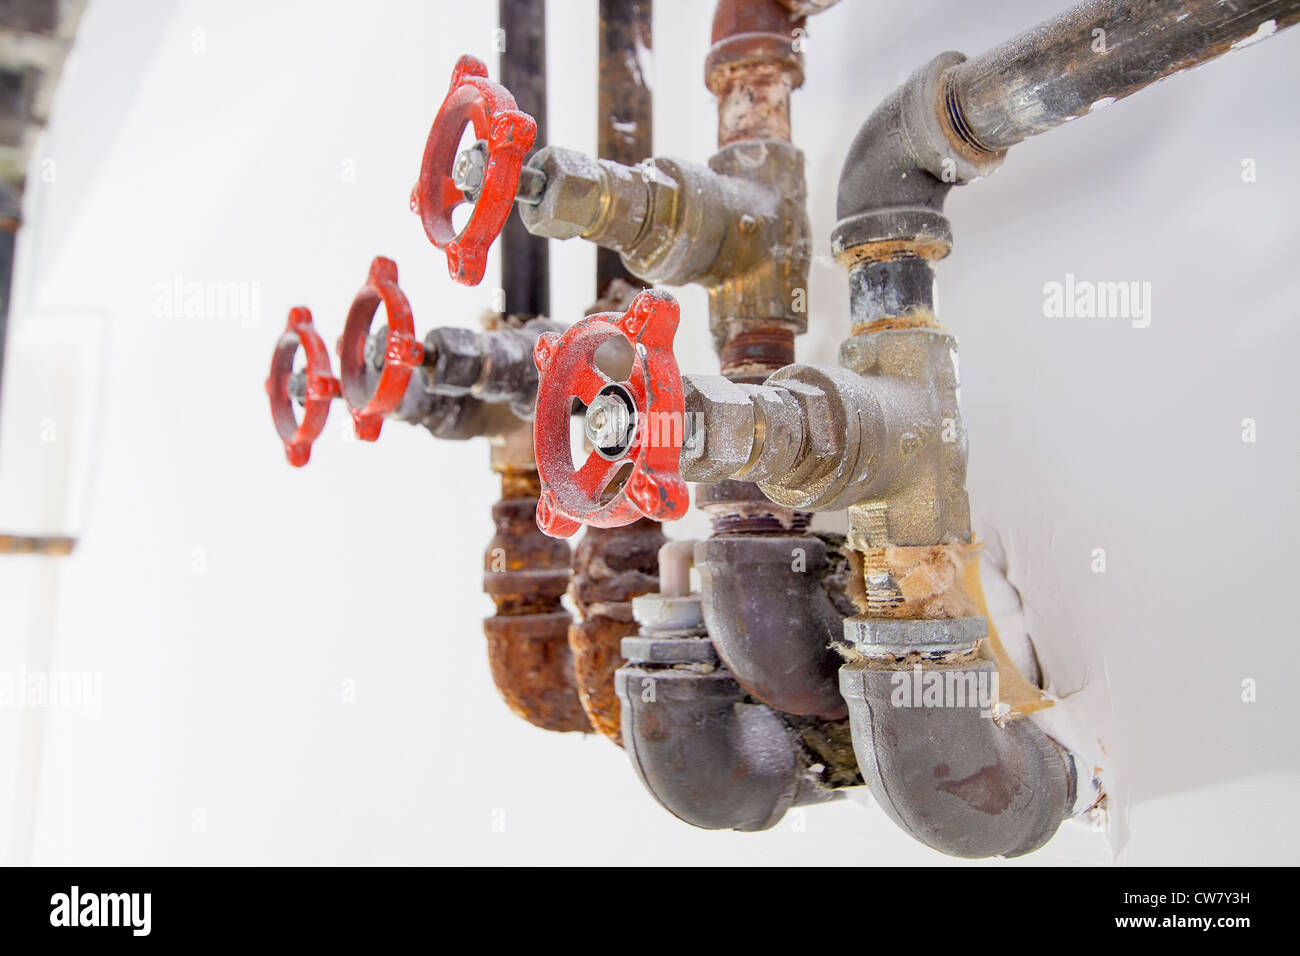 Old Heating Cooling Water Plumbing Pipes with Valves Macro Closeup Stock Photo